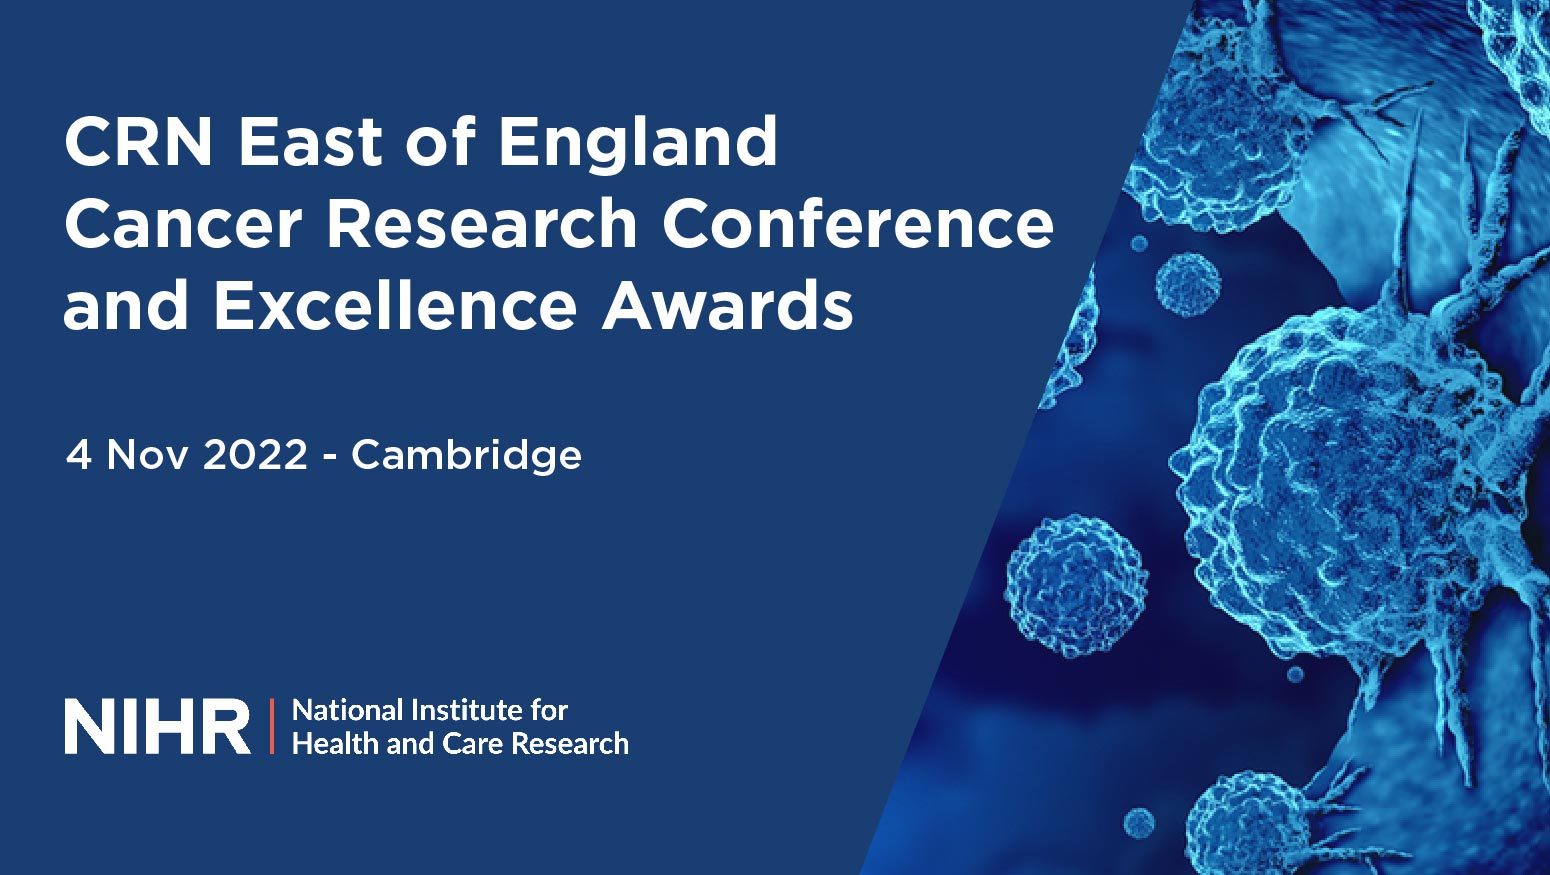 NIHR CRN East of England Cancer Research Conference Thumbnail